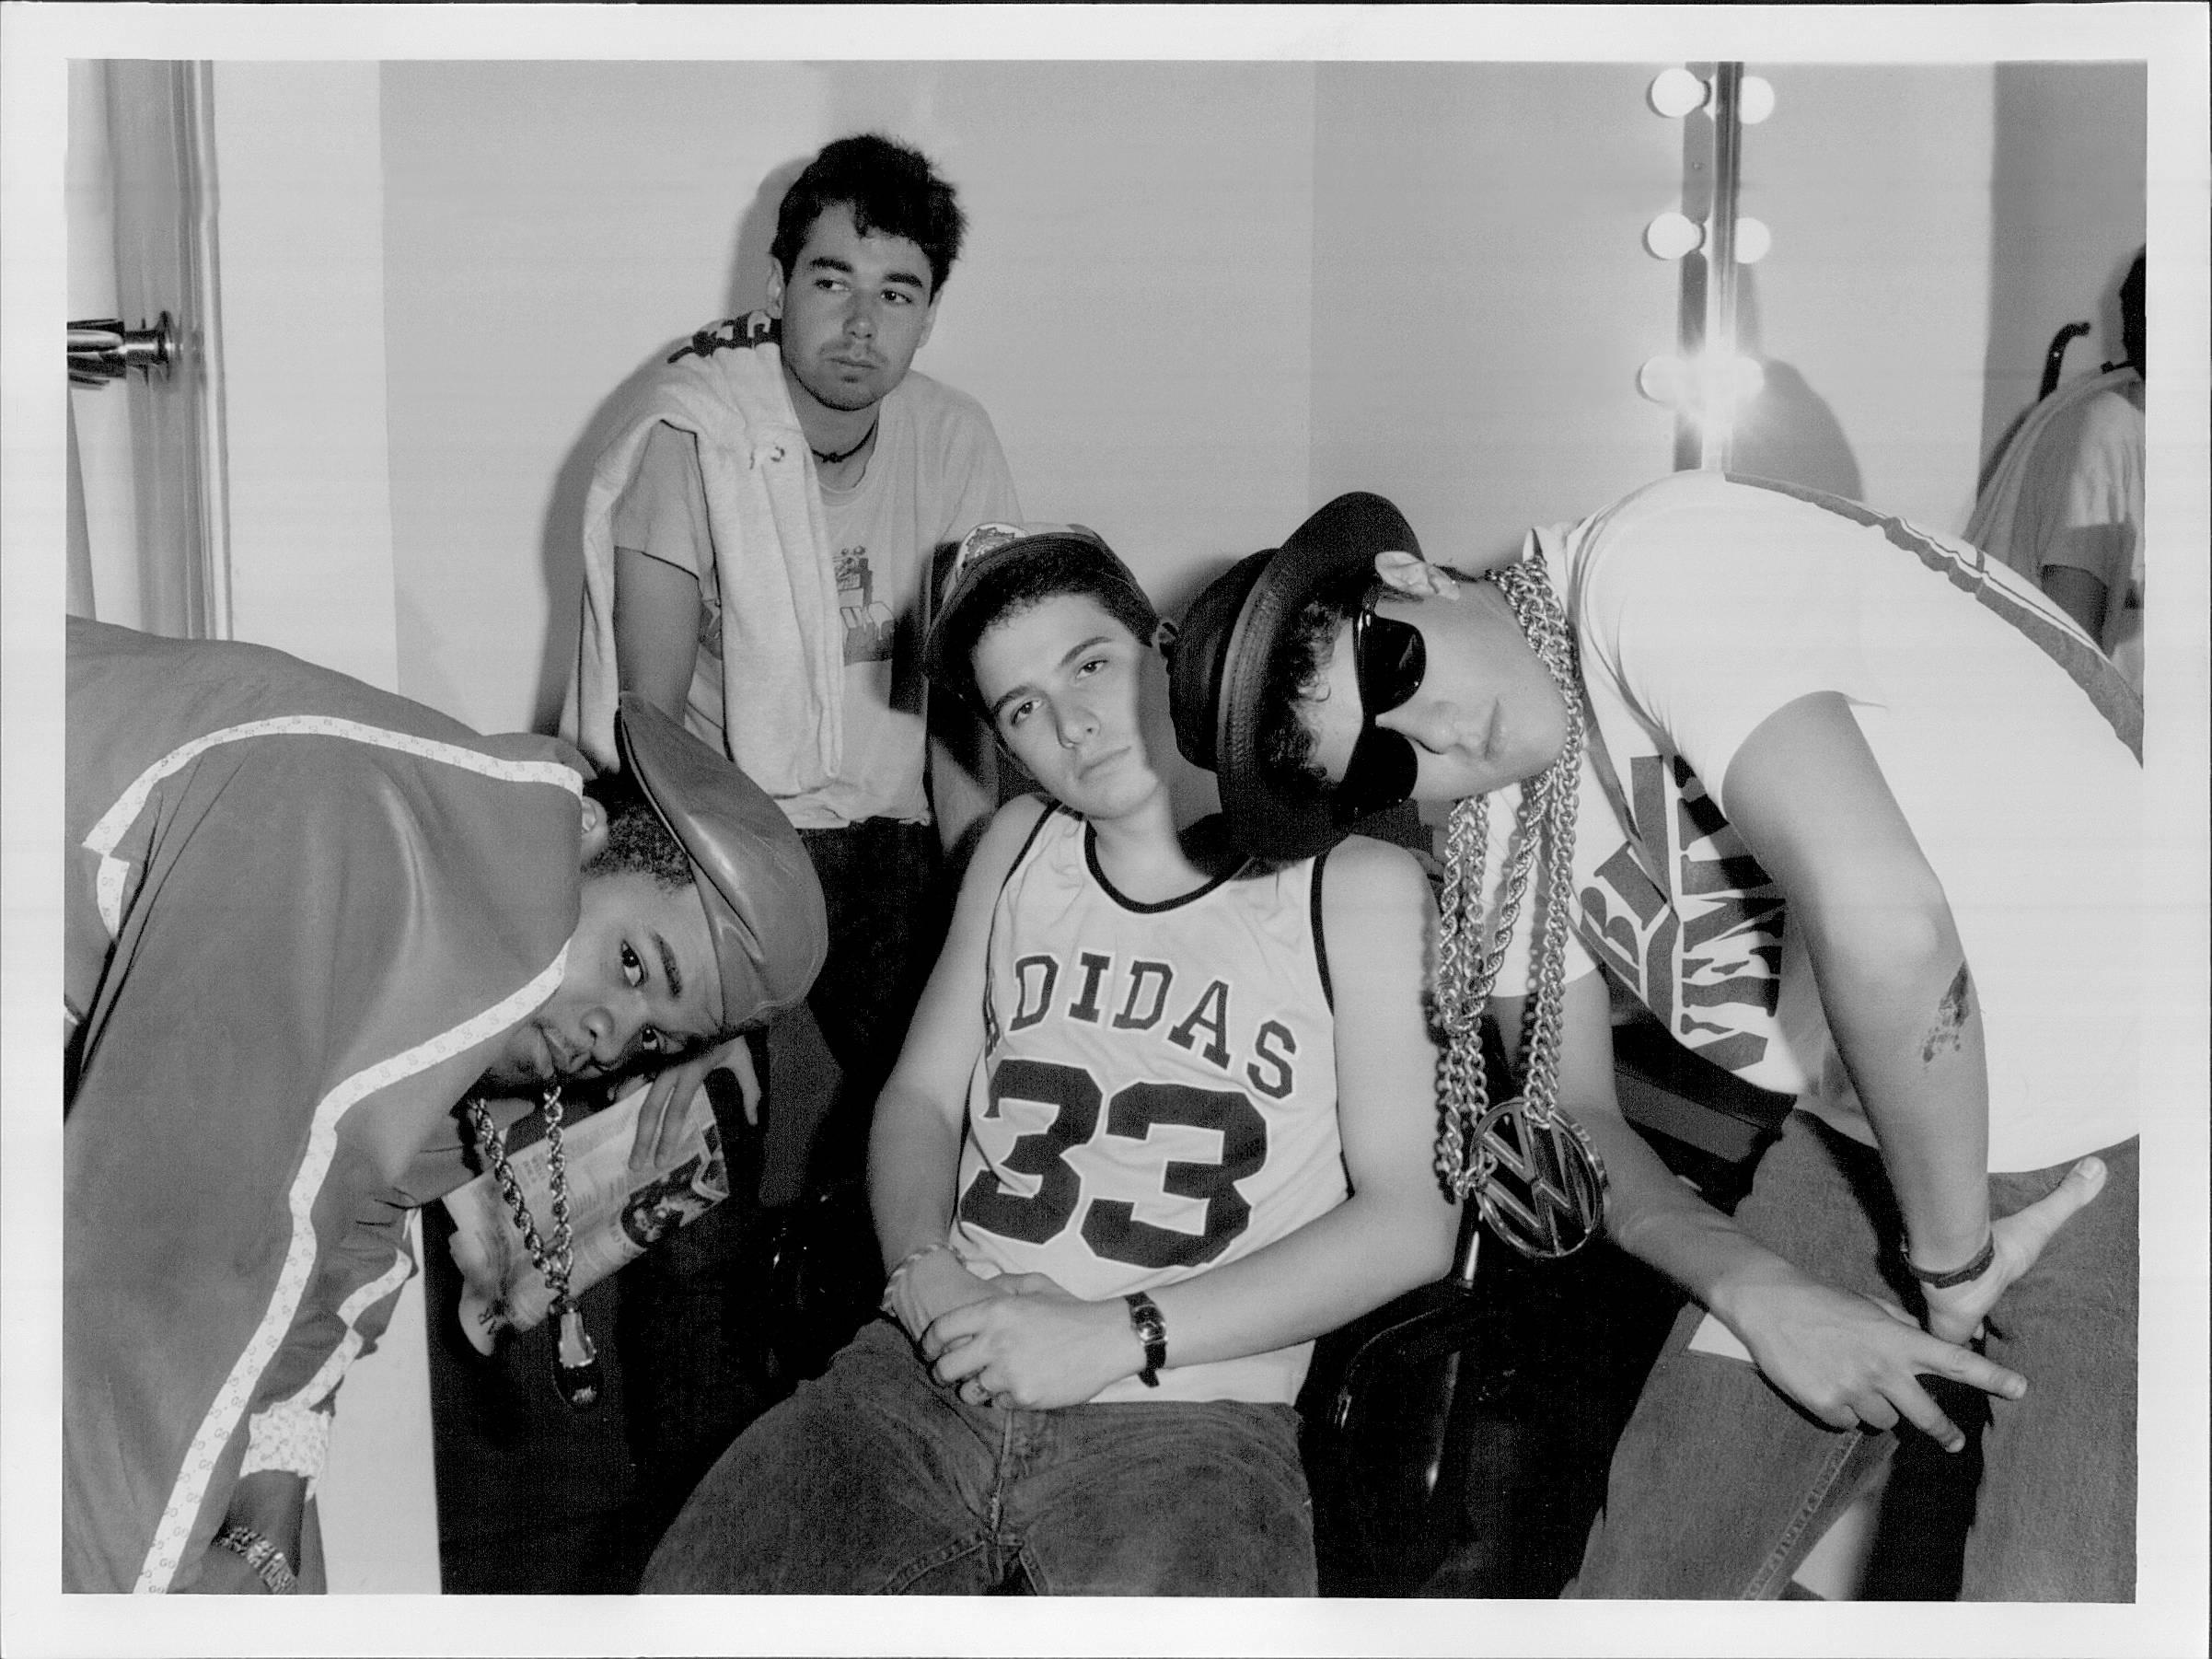 Ron Wolfson Black and White Photograph - The Beastie Boys Backstage Vintage Original Photograph